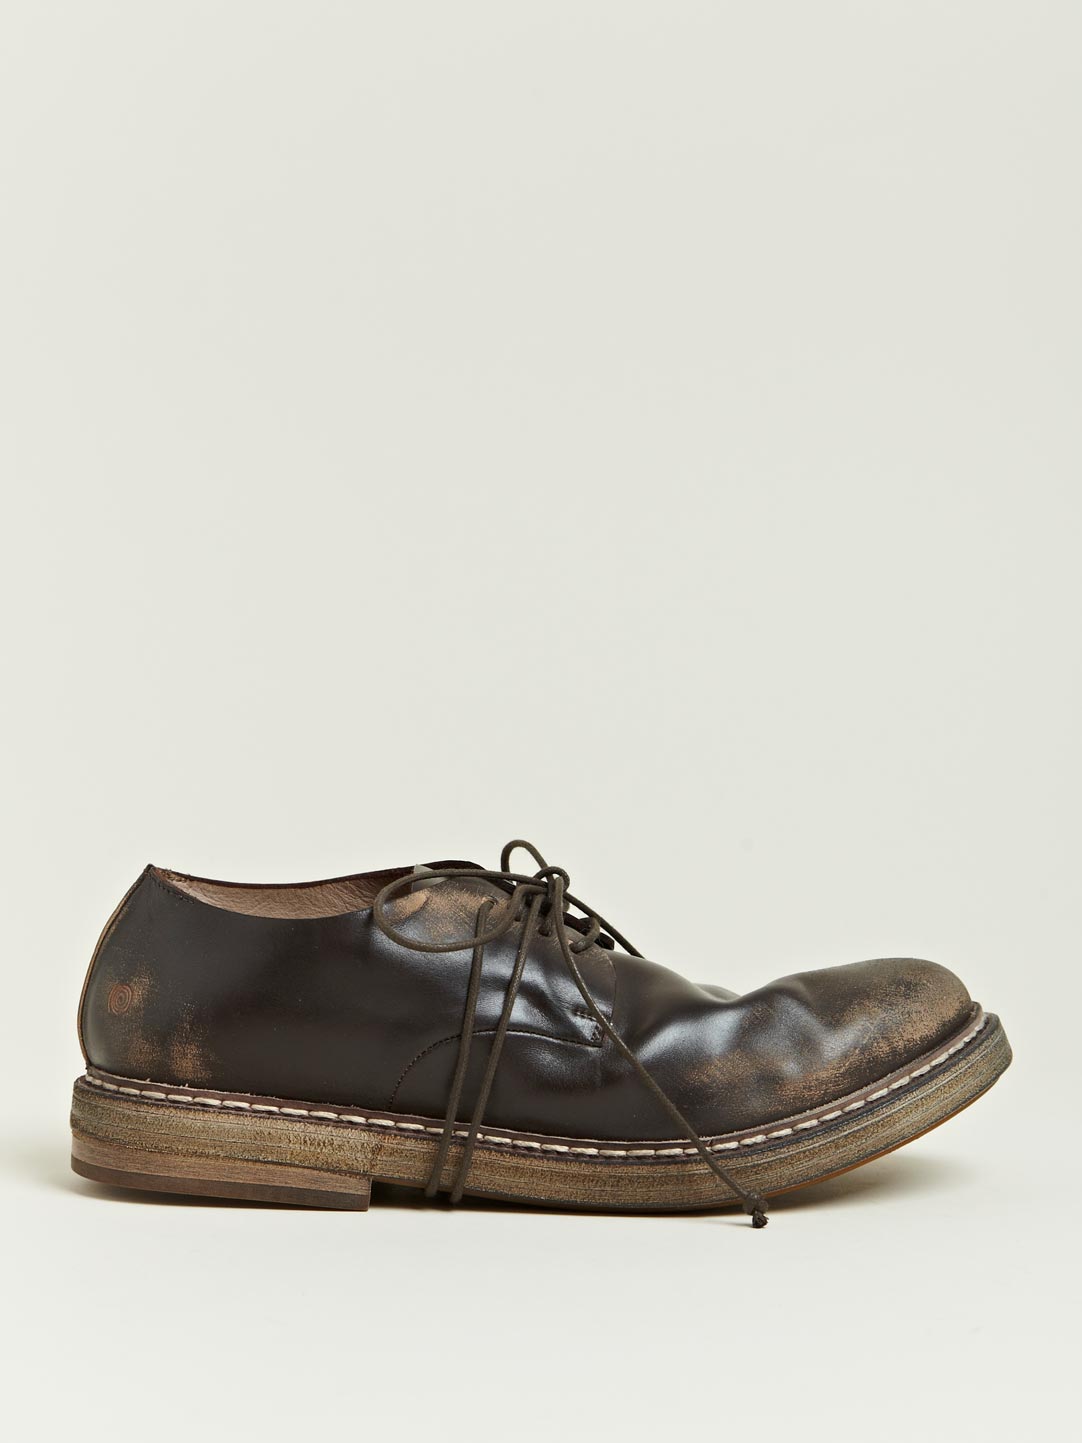 Lyst - Marsèll Marsell Mens Cerata Derby Shoes in Brown for Men